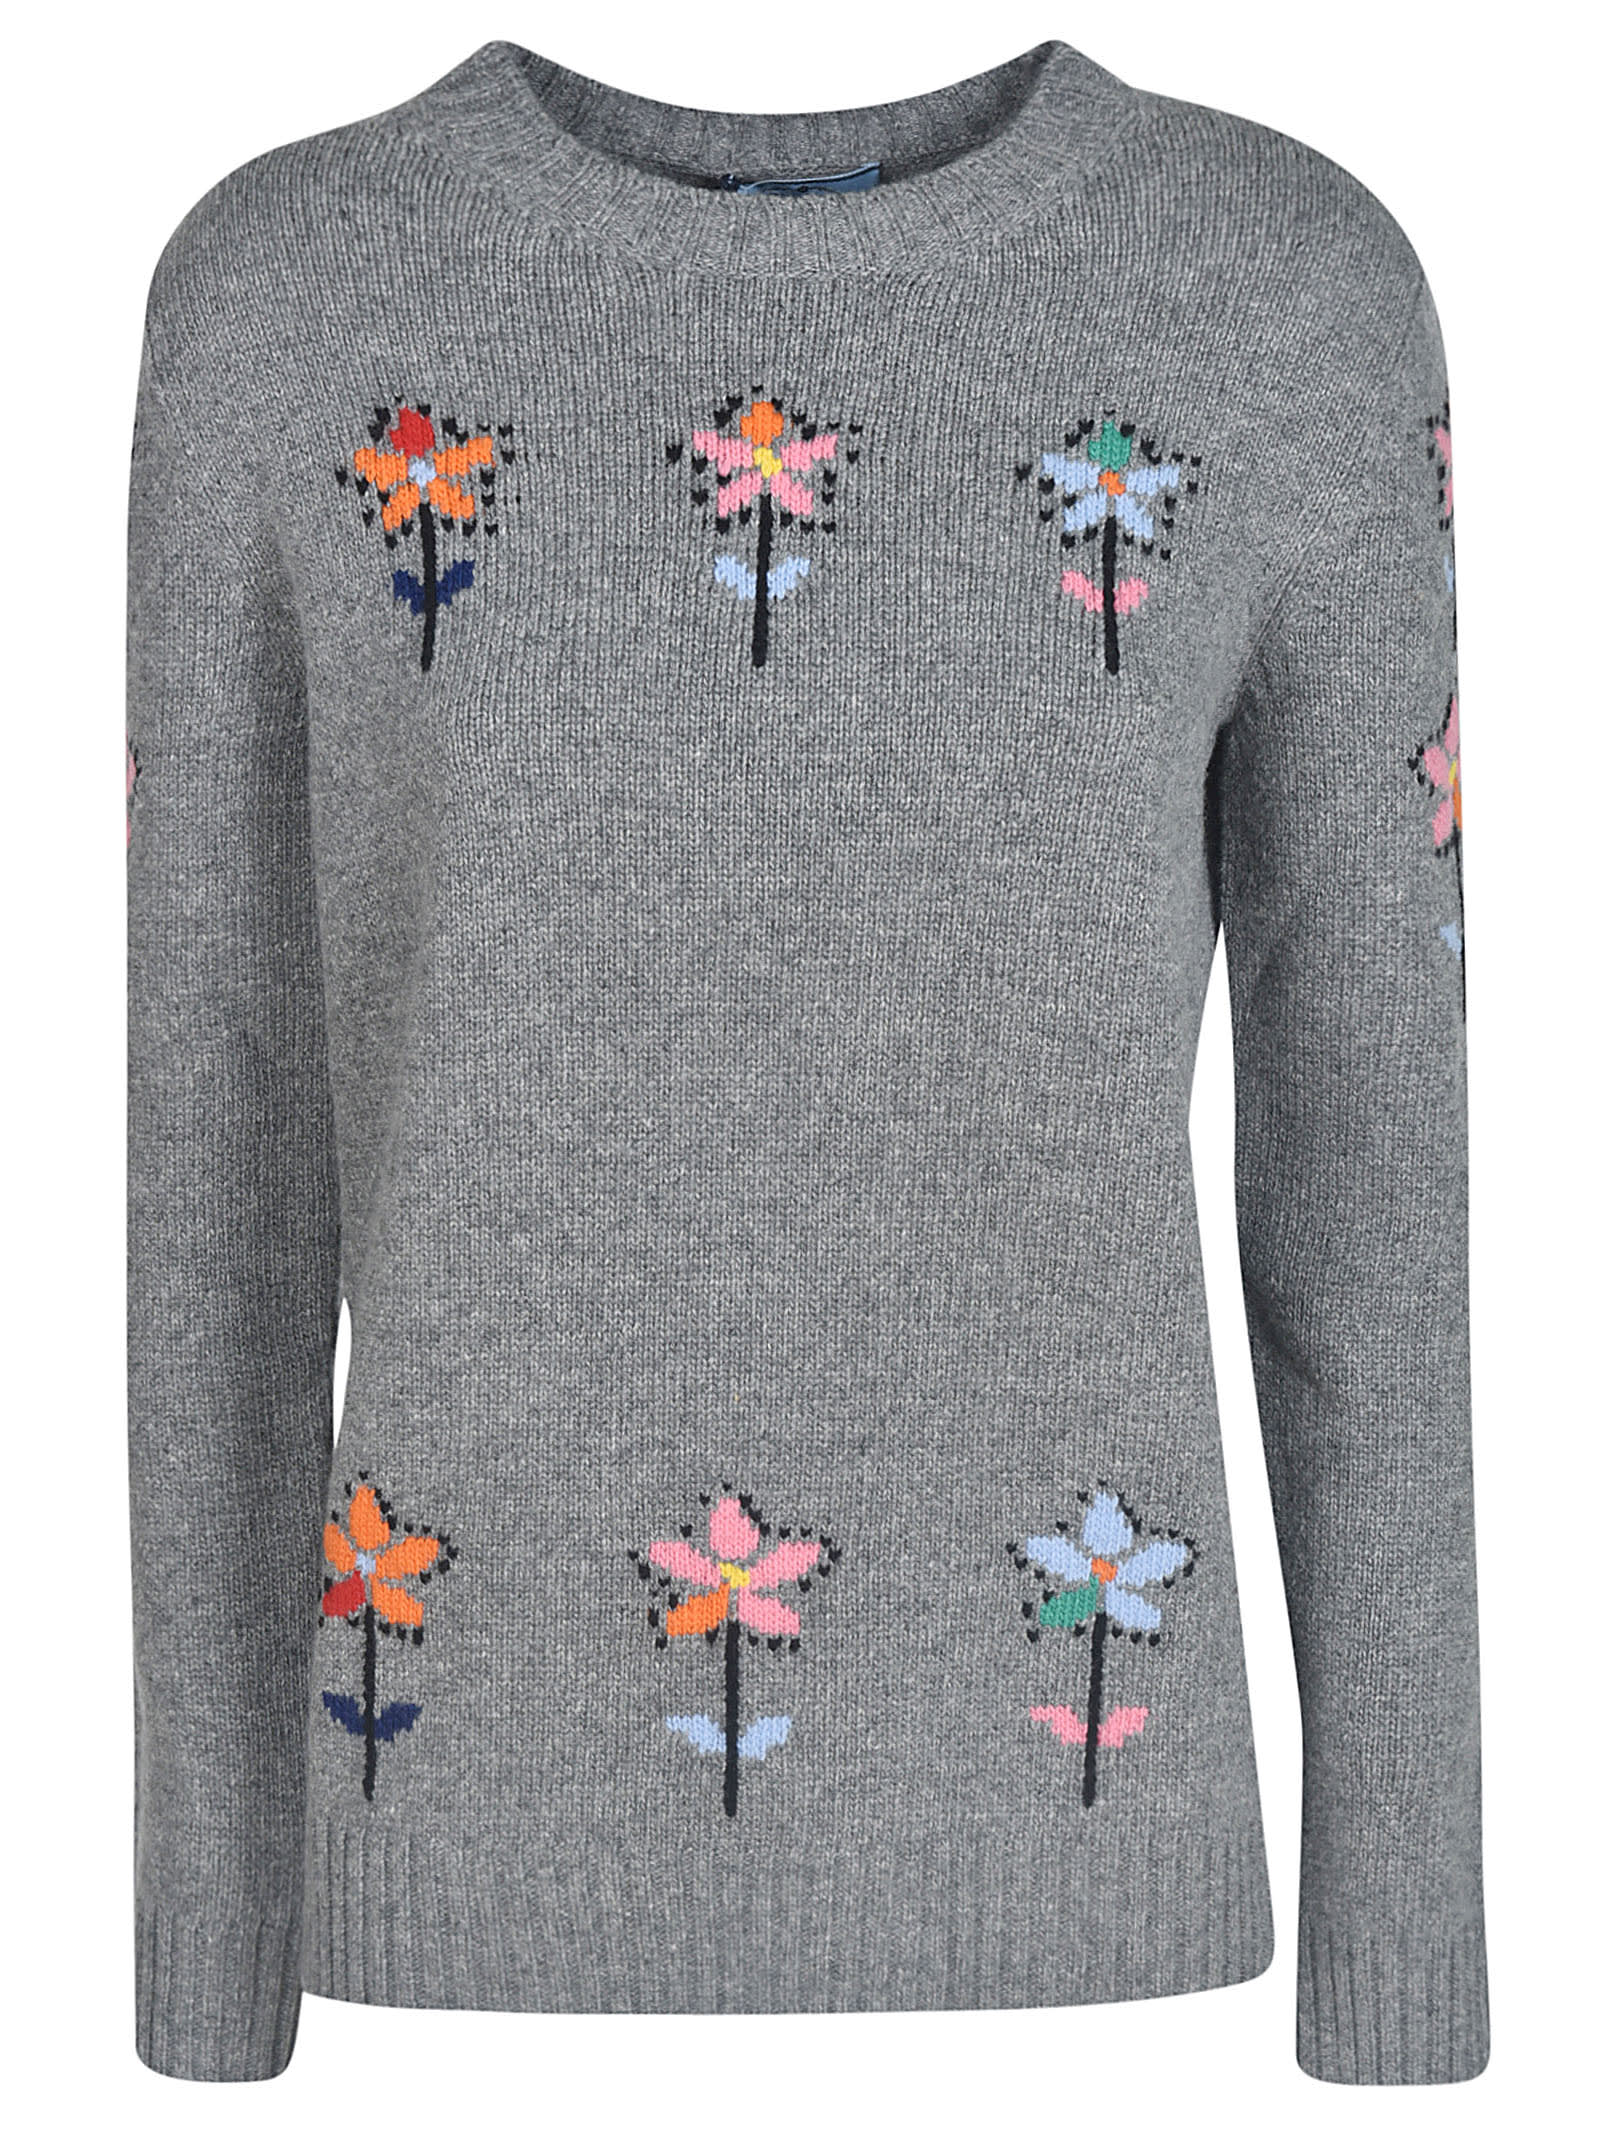 PRADA FLORAL EMBROIDERED SWEATER,11214373